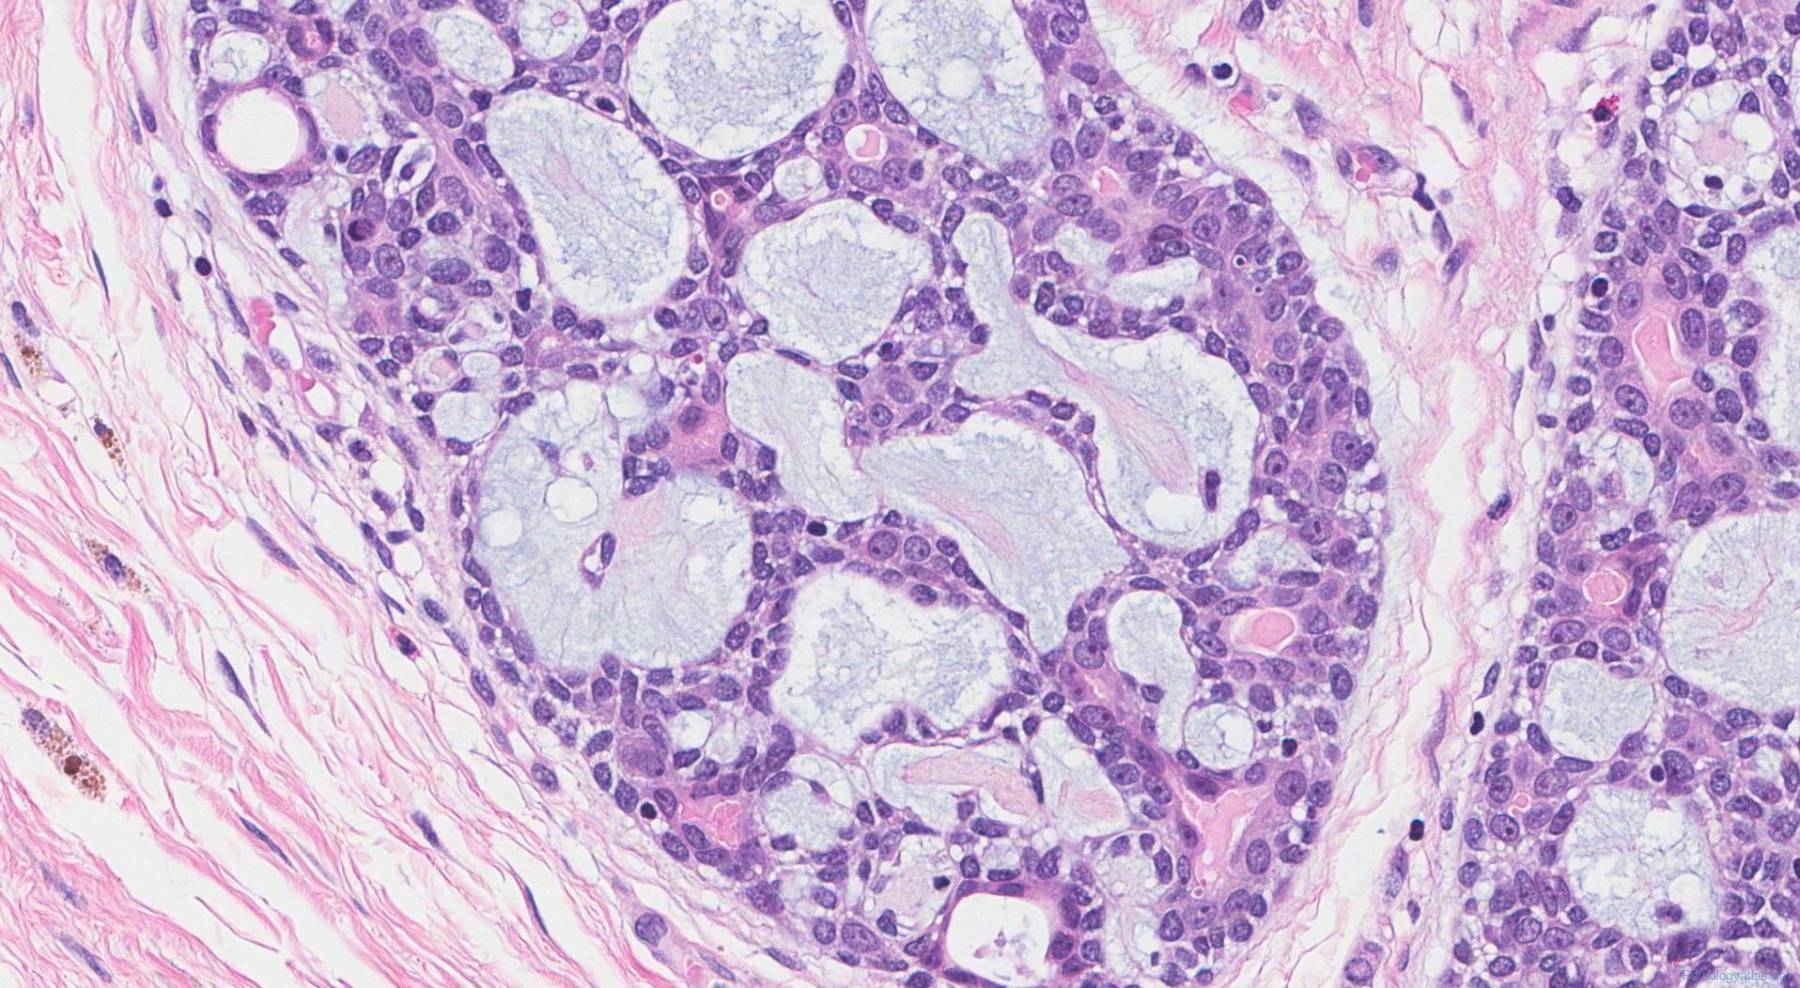 Adenoid Cystic Carcinoma Of The Breast Atlas Of Pathology